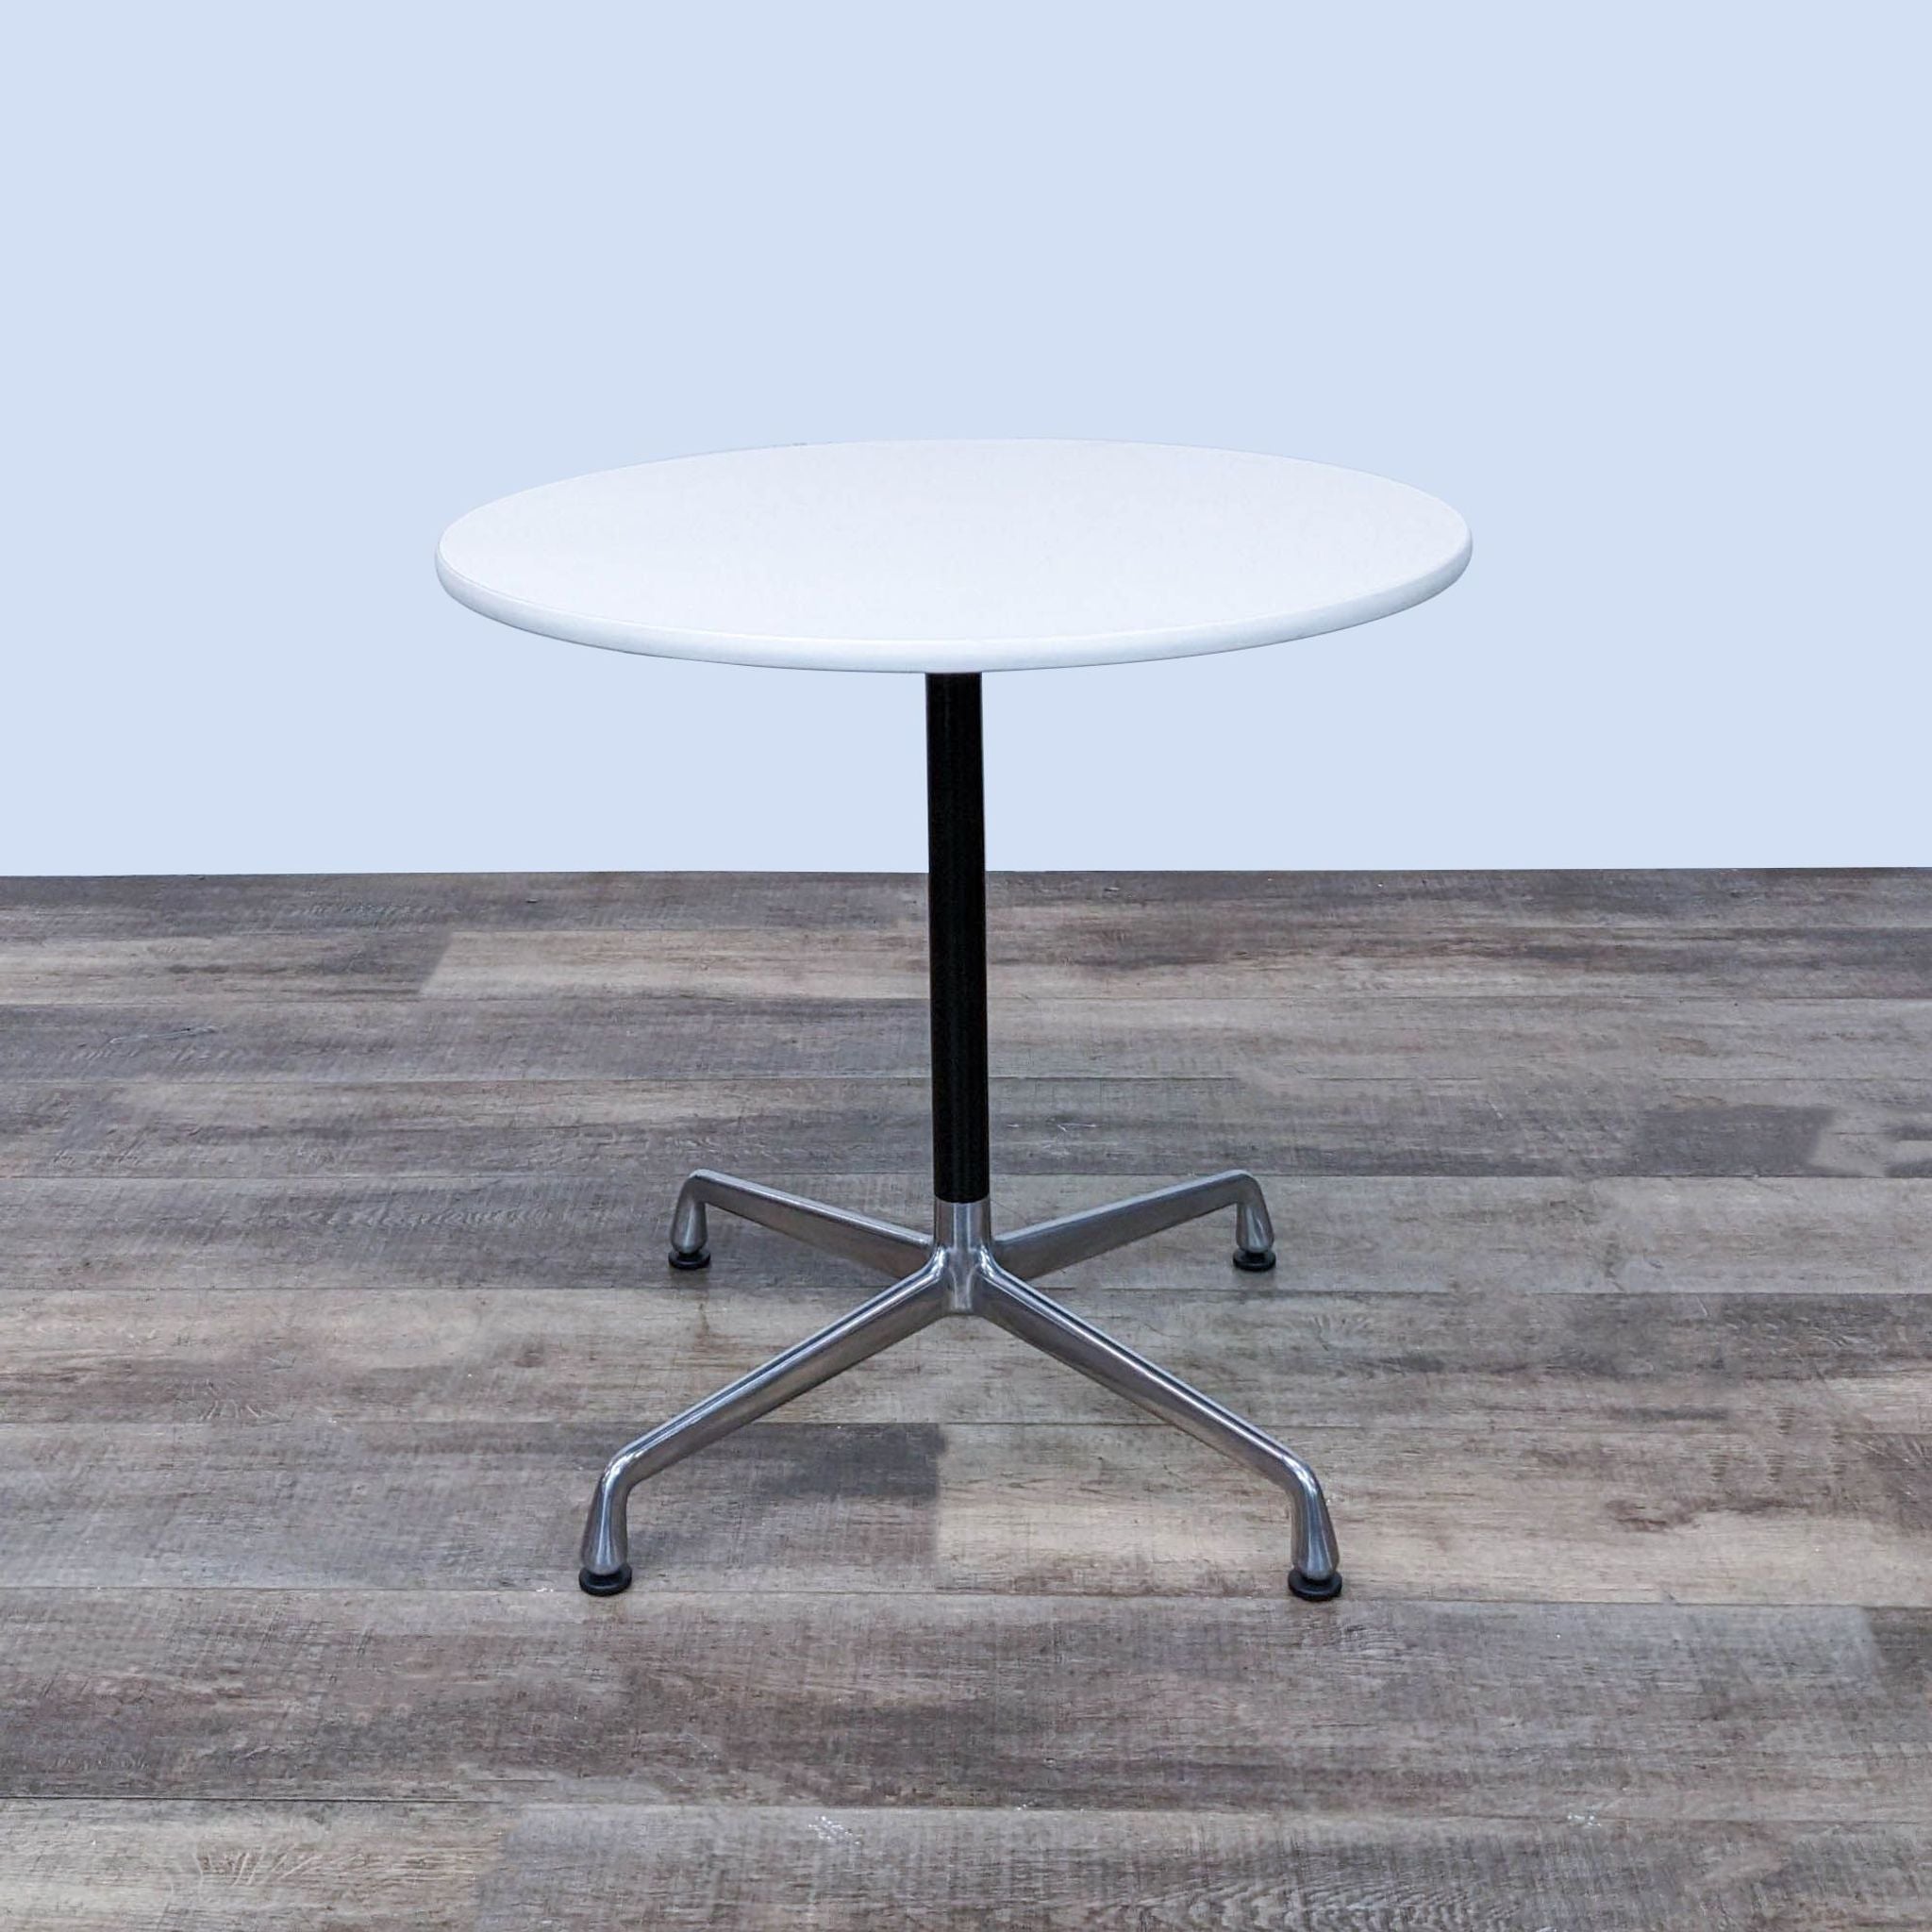 Herman Miller Eames modern round dining table with white top and chrome pedestal base on wood floor.